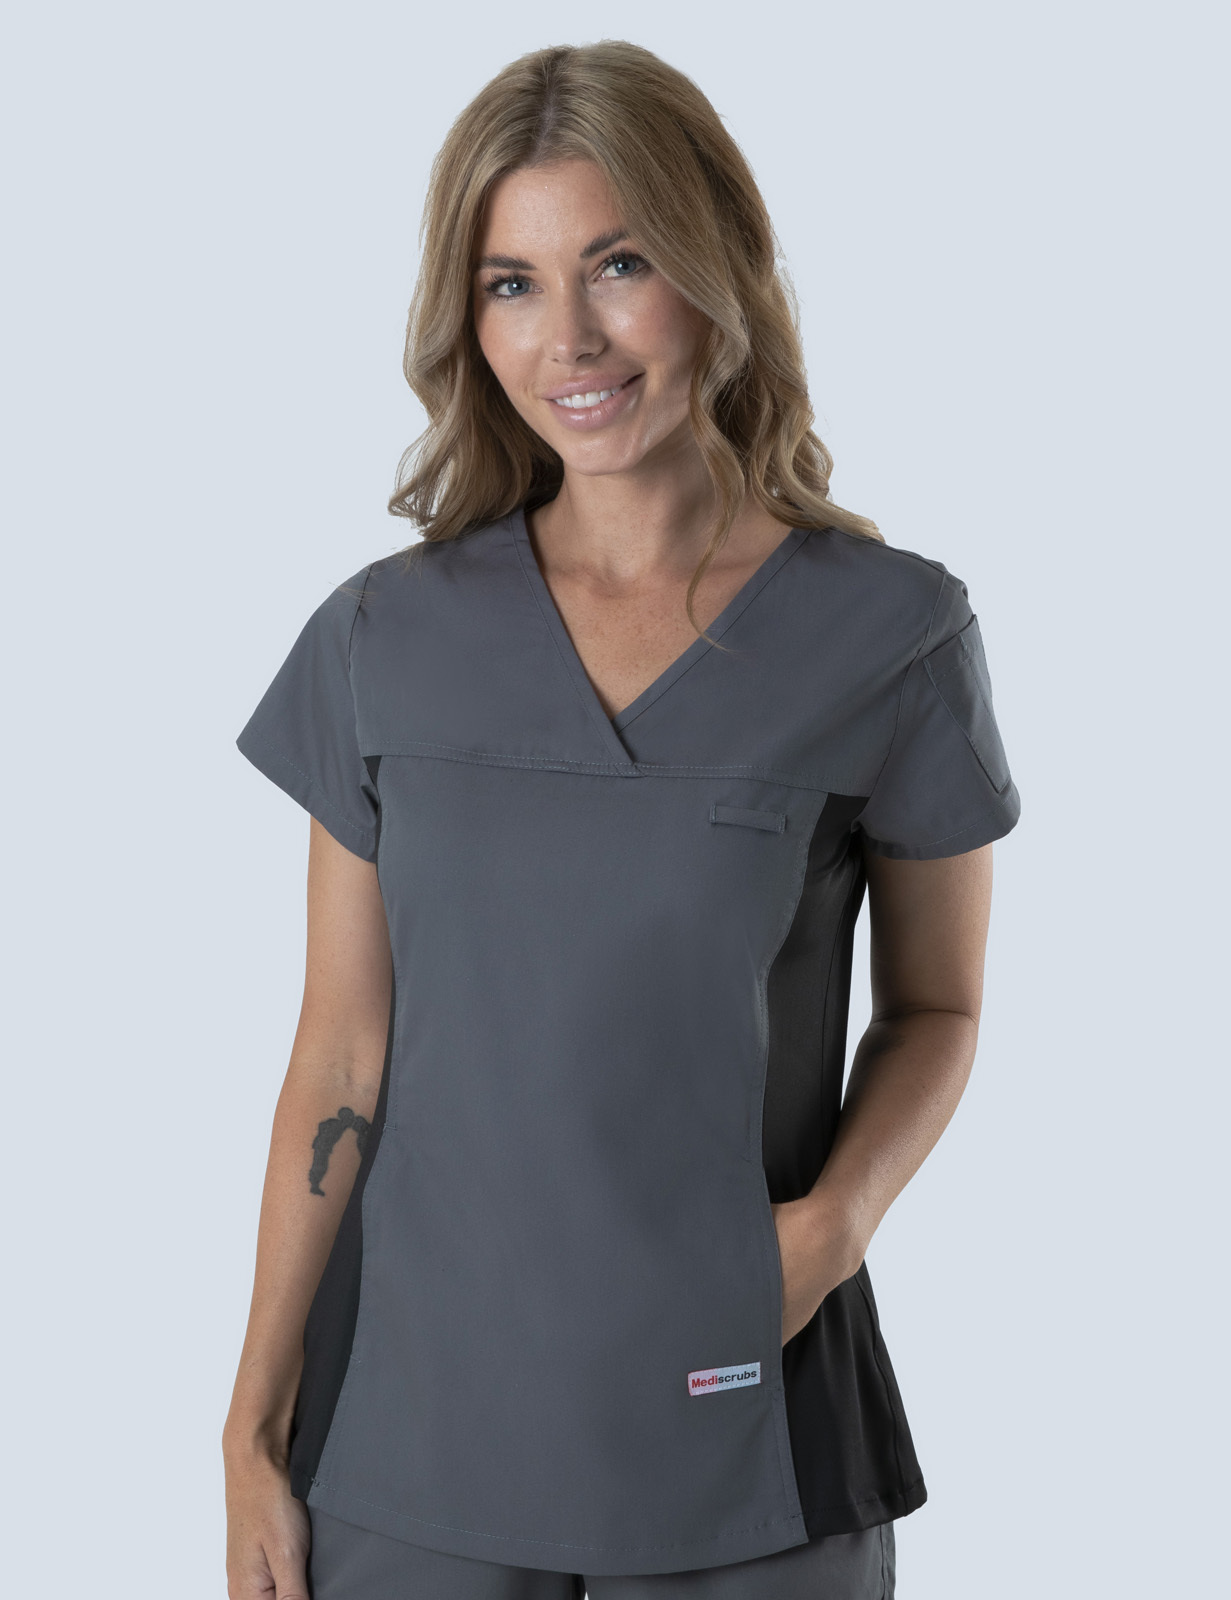 Women's Fit Solid Scrub Top With Spandex Panel - Steel Grey - Small